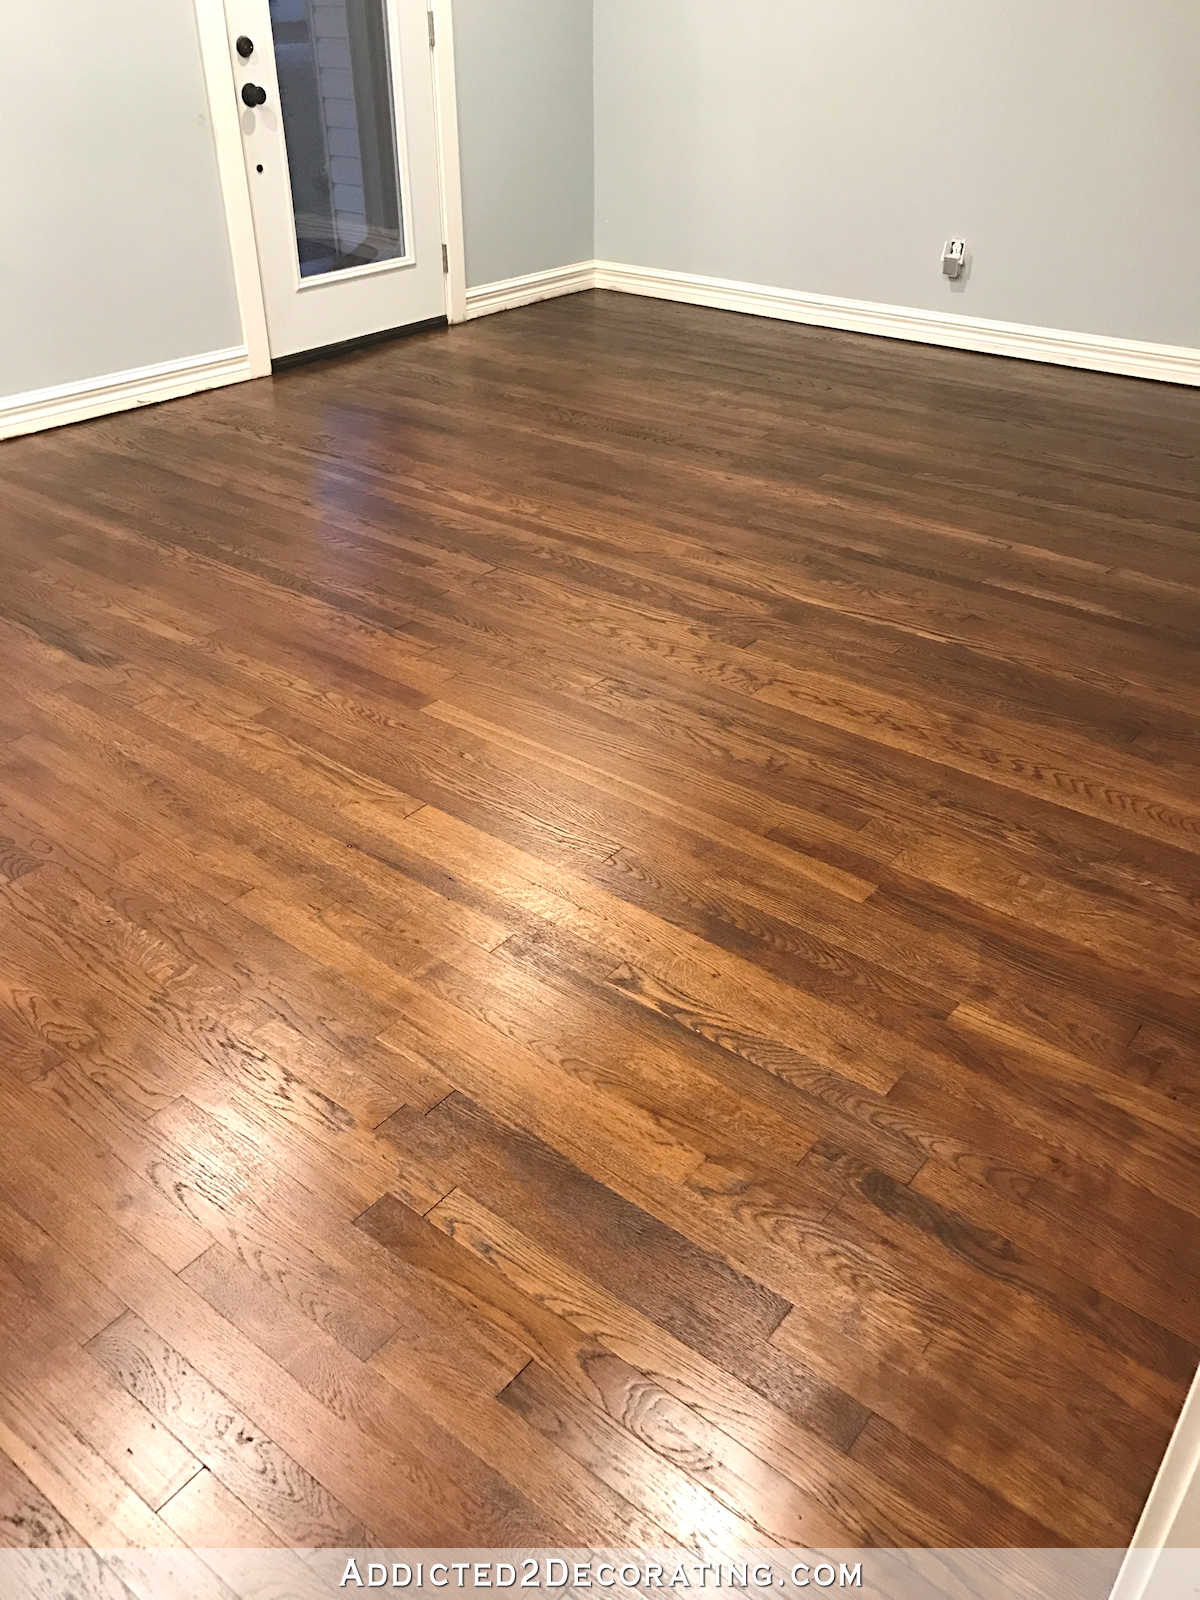 refinishing red oak hardwood floors - adding stain to first coat of polyurethane to darken the color - entryway and living room